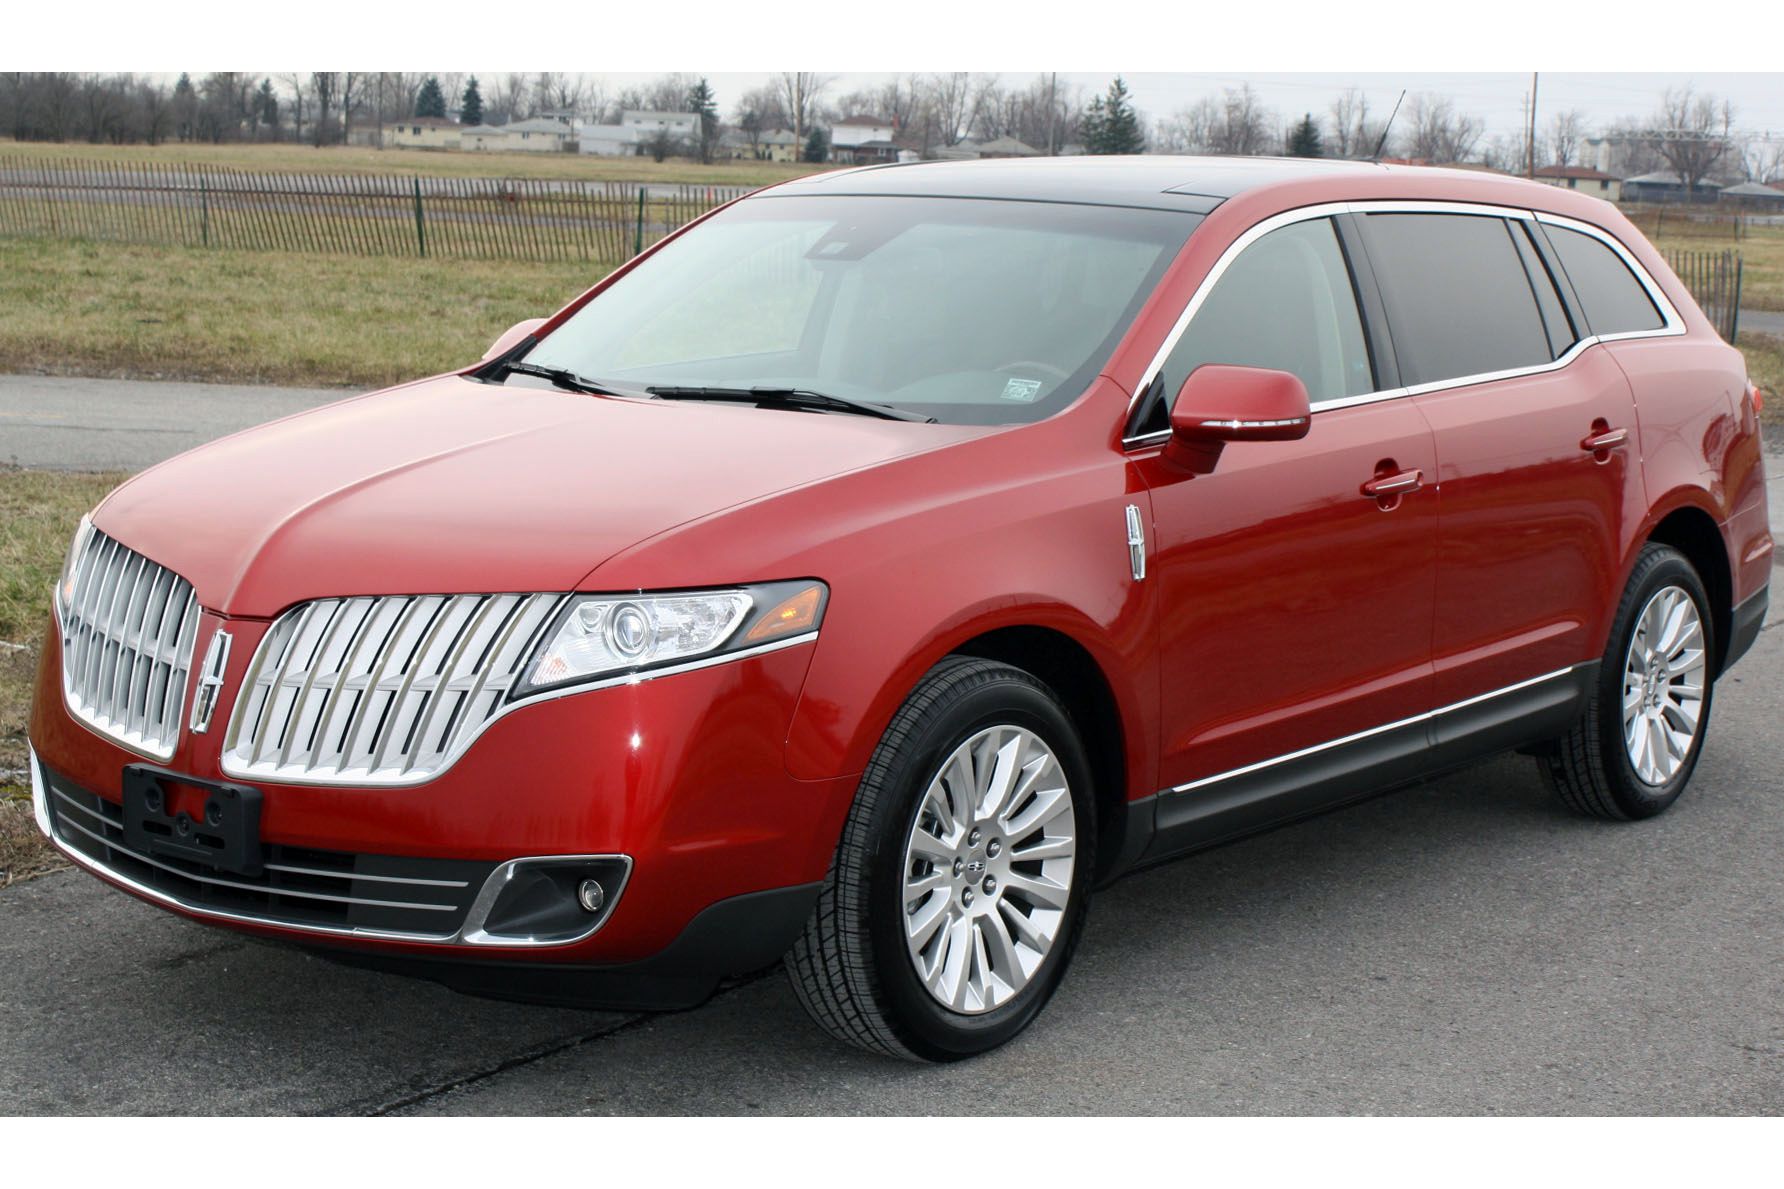 A crossover that can haul a laughable amount of junk in its oversized trunk, the Lincoln MKT has changed little since it was unveiled in 2010. And that's ... unfortunate, unless you're into cars with disproportionate rear ends (hey, we won't judge). The Daily Drive calls it <a href="http://blog.consumerguide.com/sport-utility-yuck-ugliest-suvs-past-twenty-years/">one of the ugliest SUVs of the past 20 years</a>. "There's really no way around this: The MKT is ungainly ... The overall look is not unlike a wheelbarrow rolling backwards."